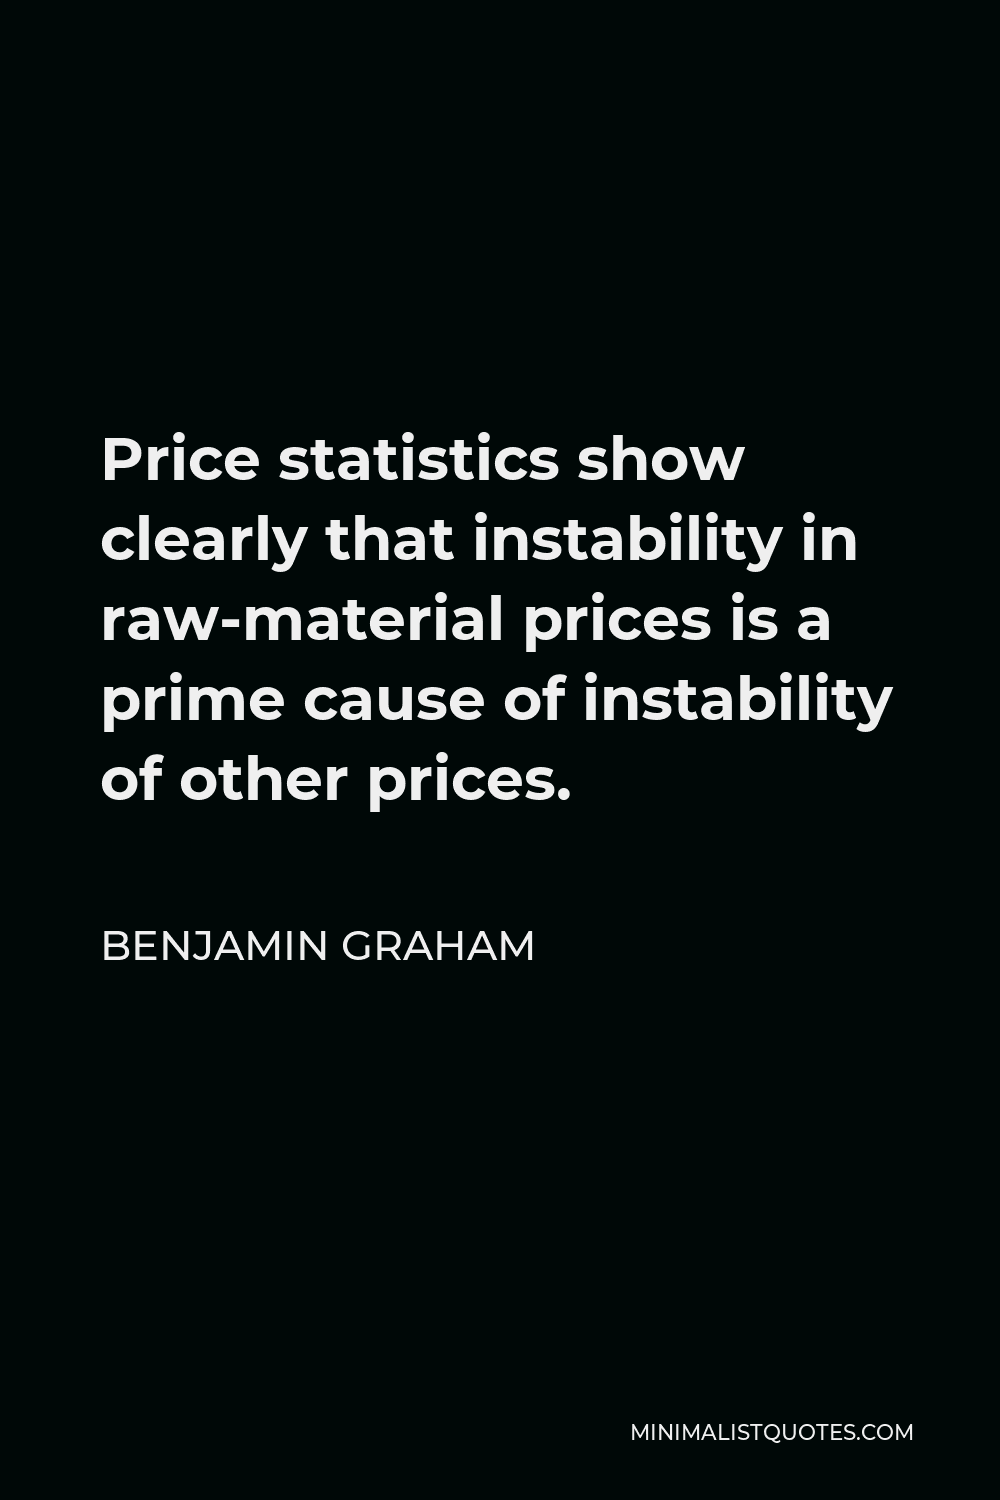 Benjamin Graham Quote - Price statistics show clearly that instability in raw-material prices is a prime cause of instability of other prices.